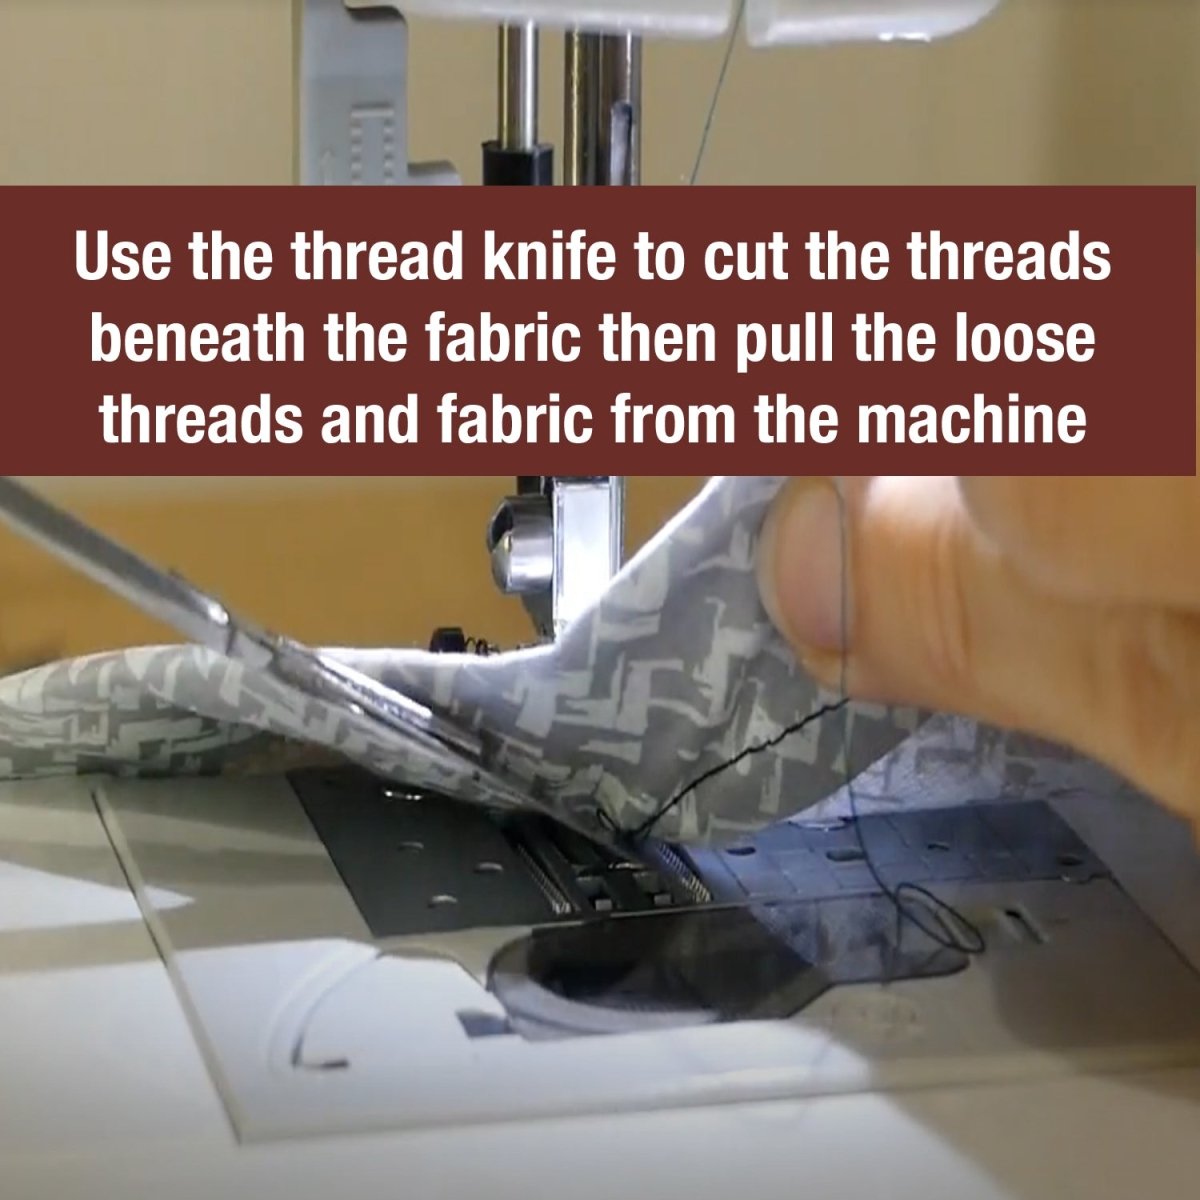 Cut the bird nest with a thread knife to untangle your sewing project